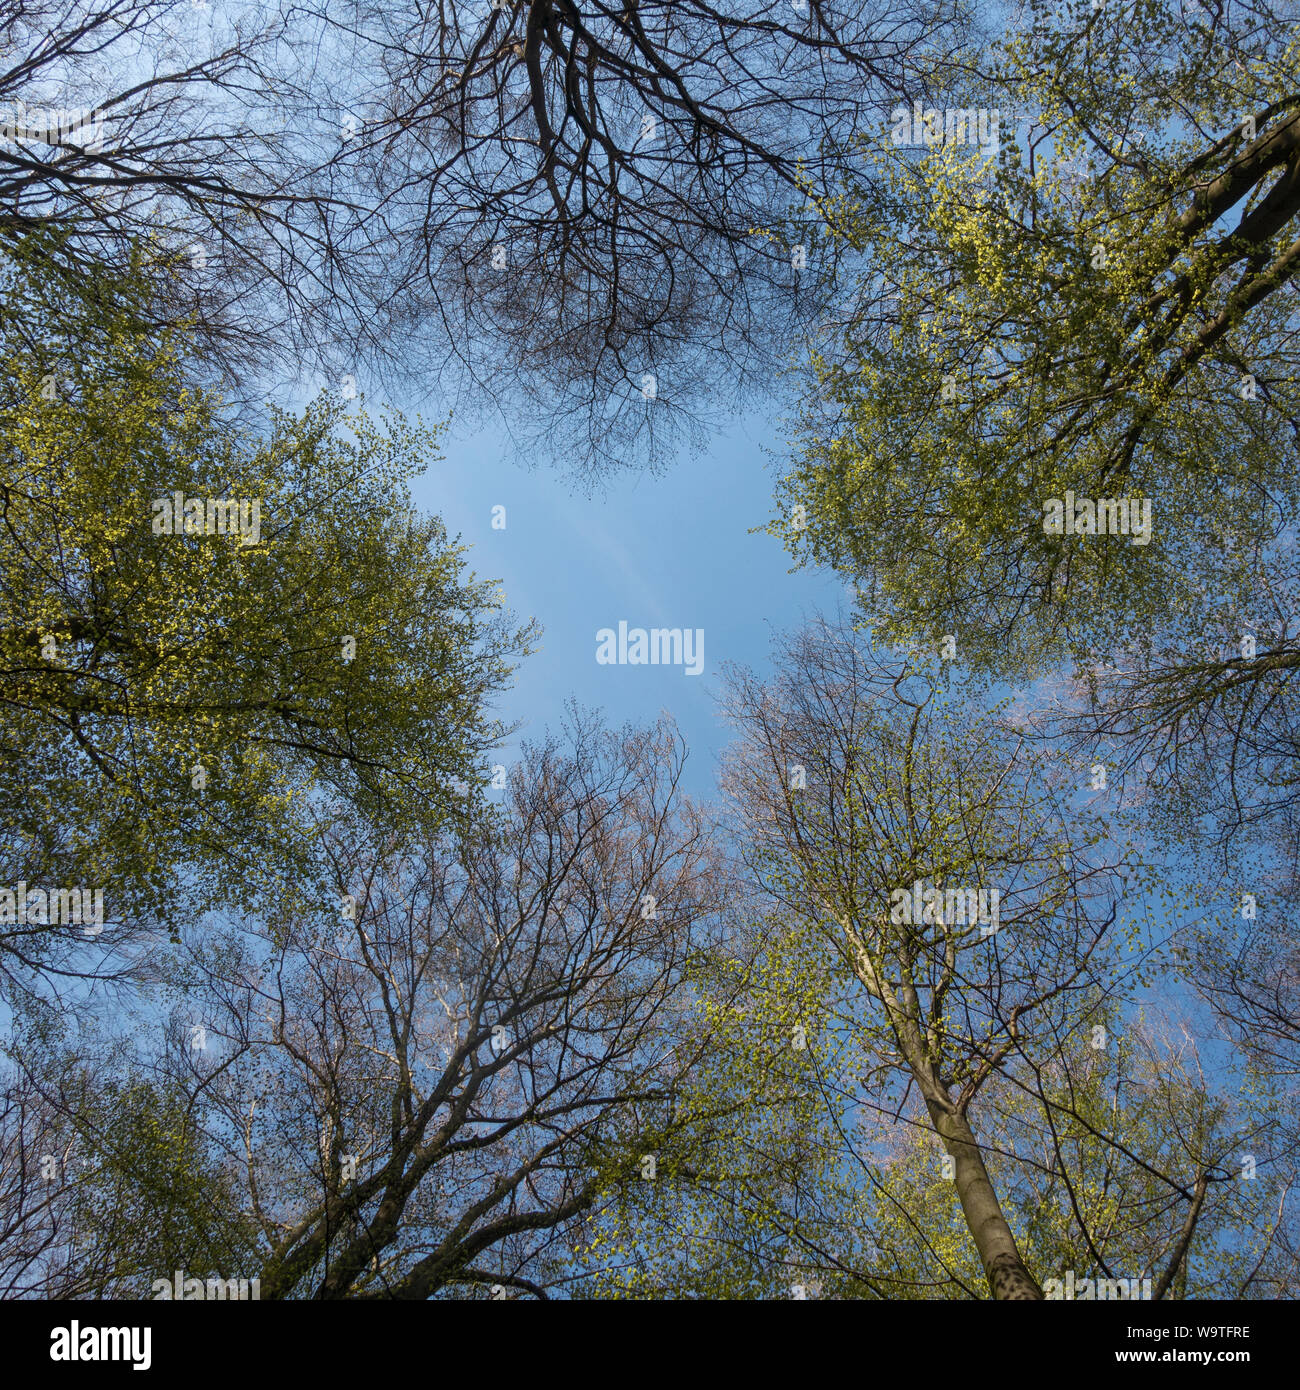 Tree tops in Spring, a look in the blue sky, Beech trees in spring, Germany, Europe. Stock Photo